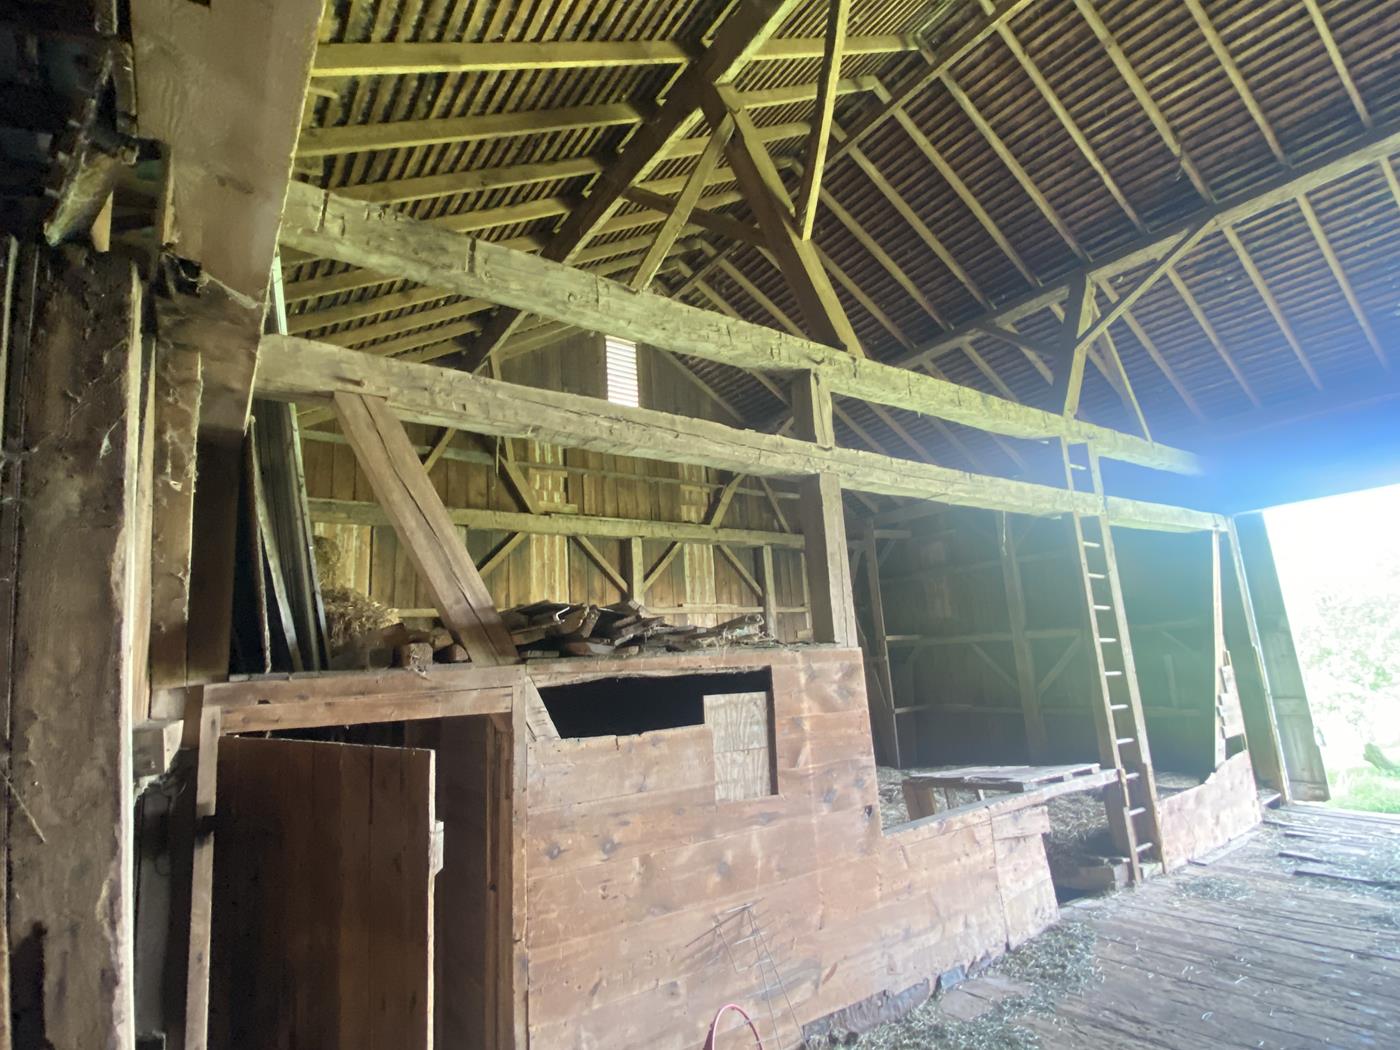 https://www.ohiovalleybarnsalvage.com/images/Marlatt Historic Ohio Barn Frame For Sale - Your Source For Reclaimed Wood Flooring